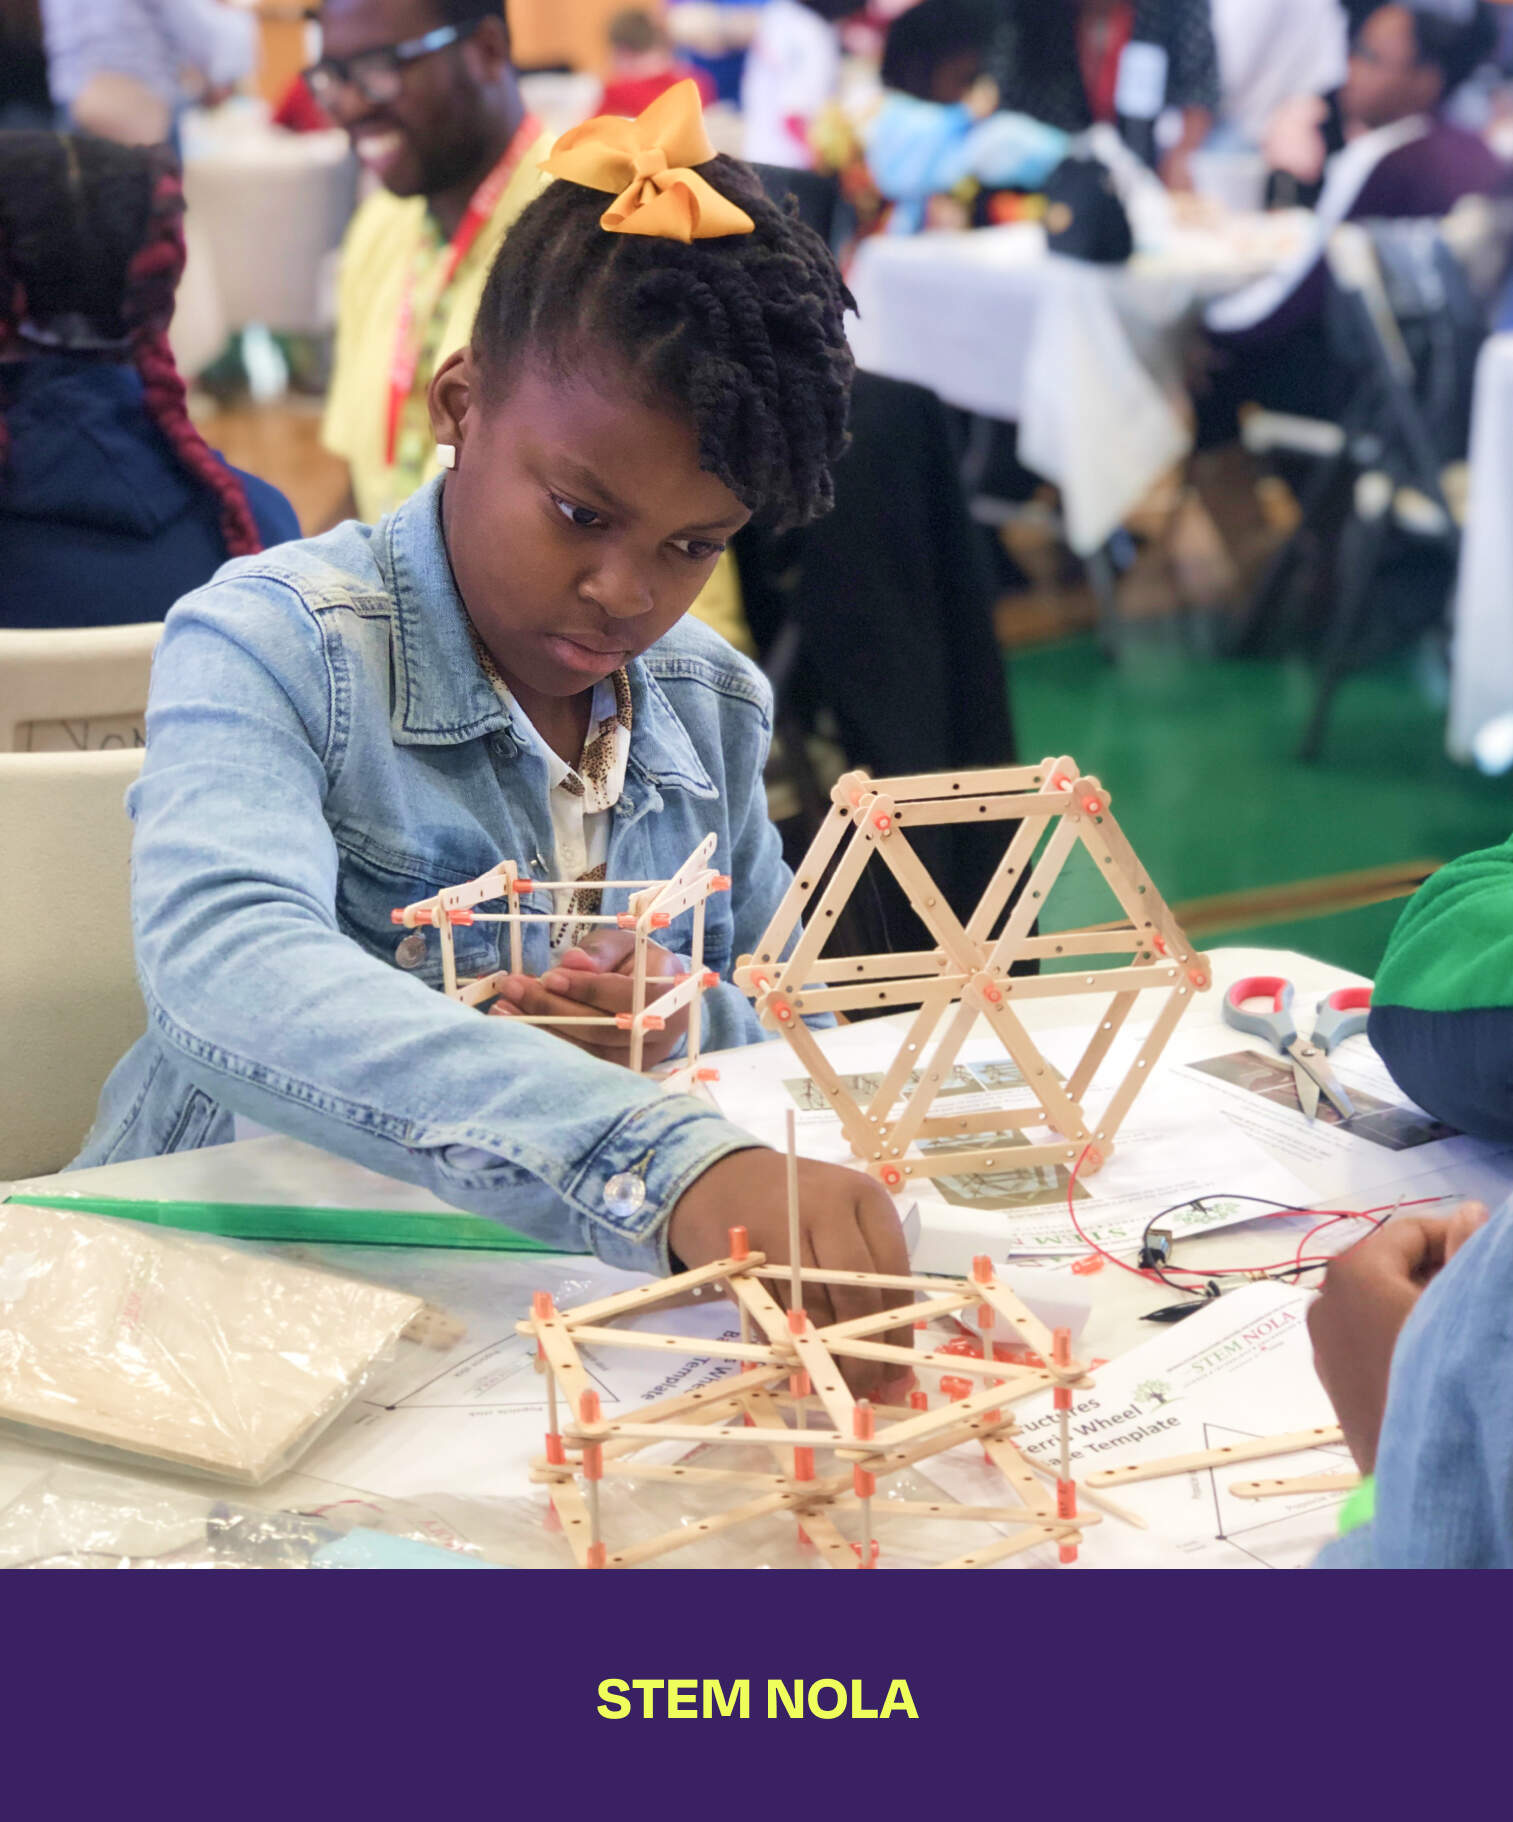 Stem Nola. A girl building a sculpture made out of popsicle sticks.